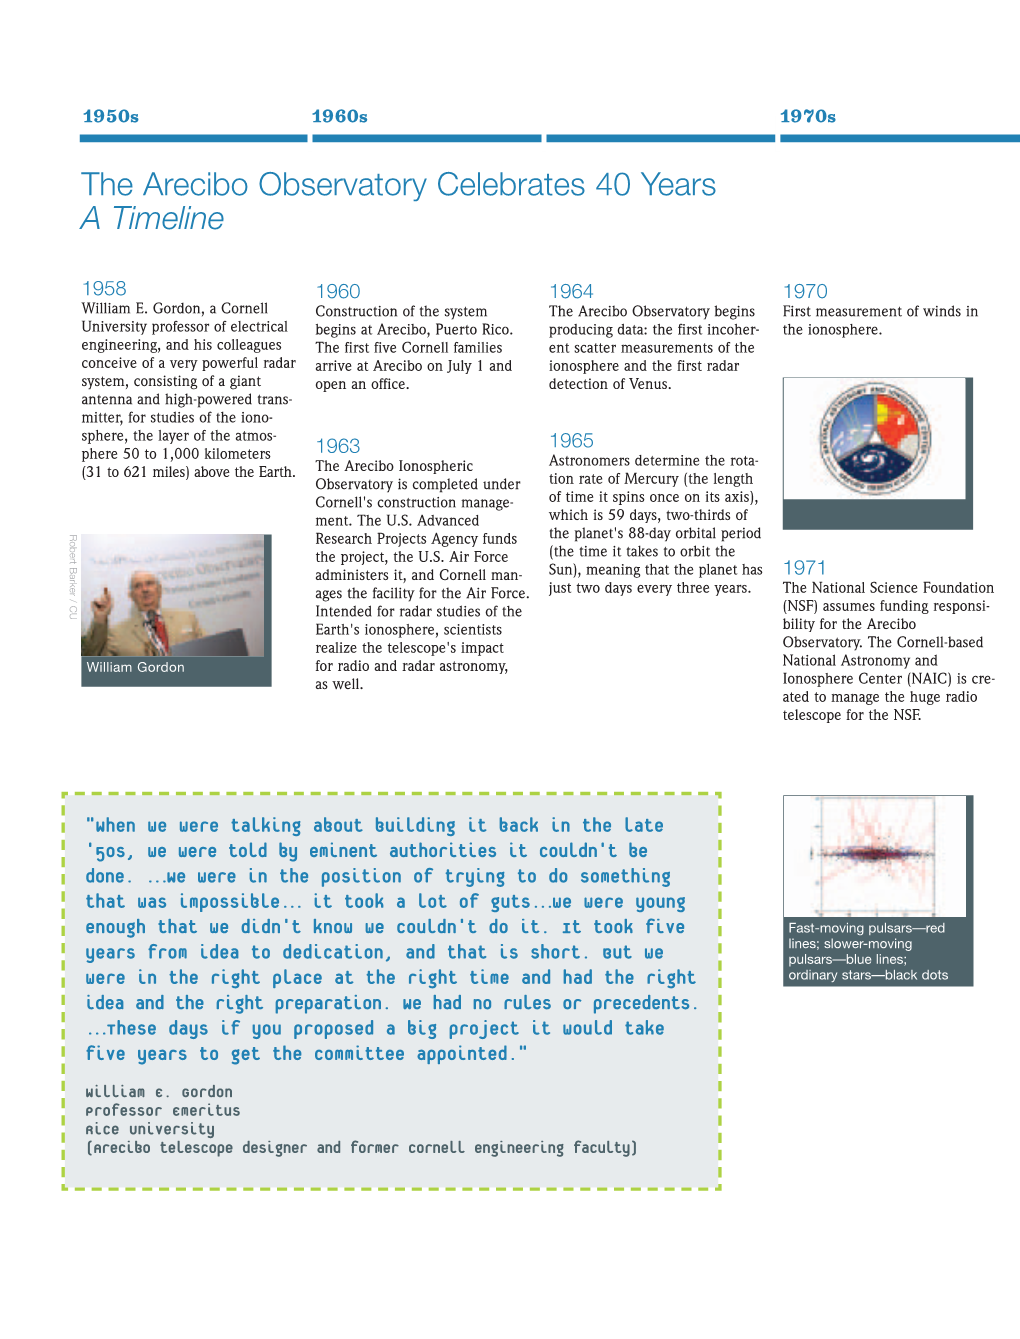 The Arecibo Observatory Celebrates 40 Years a Timeline